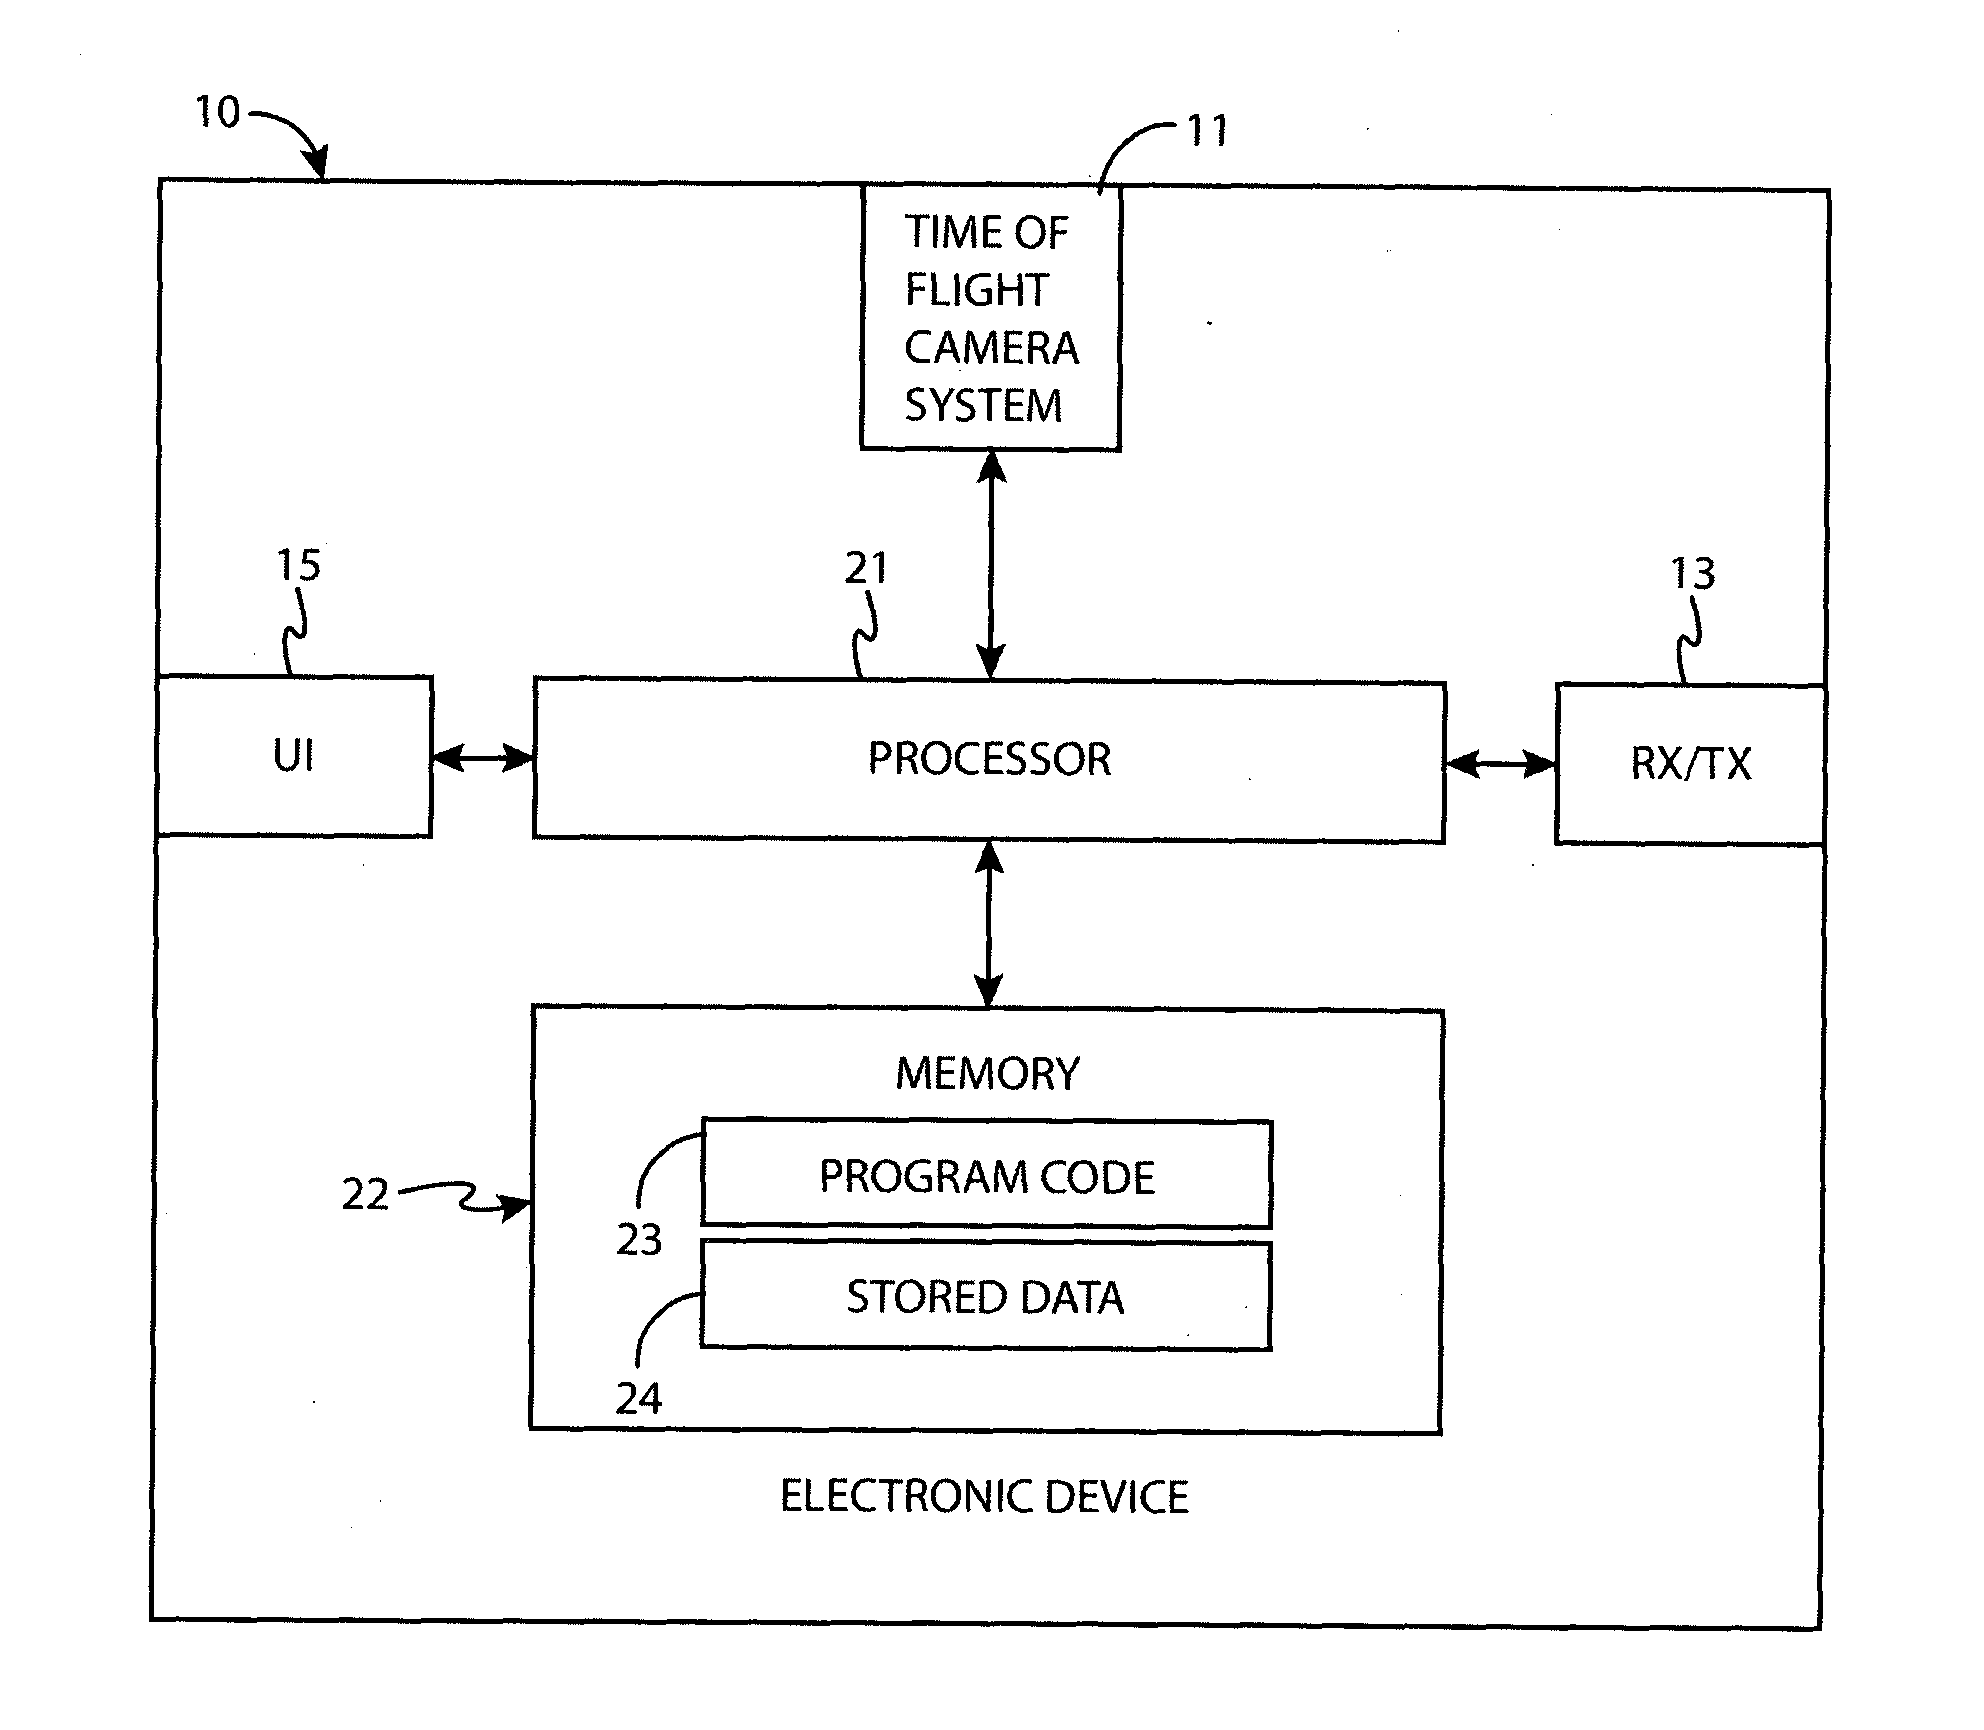 A method and apparatus for de-noising data from a distance sensing camera